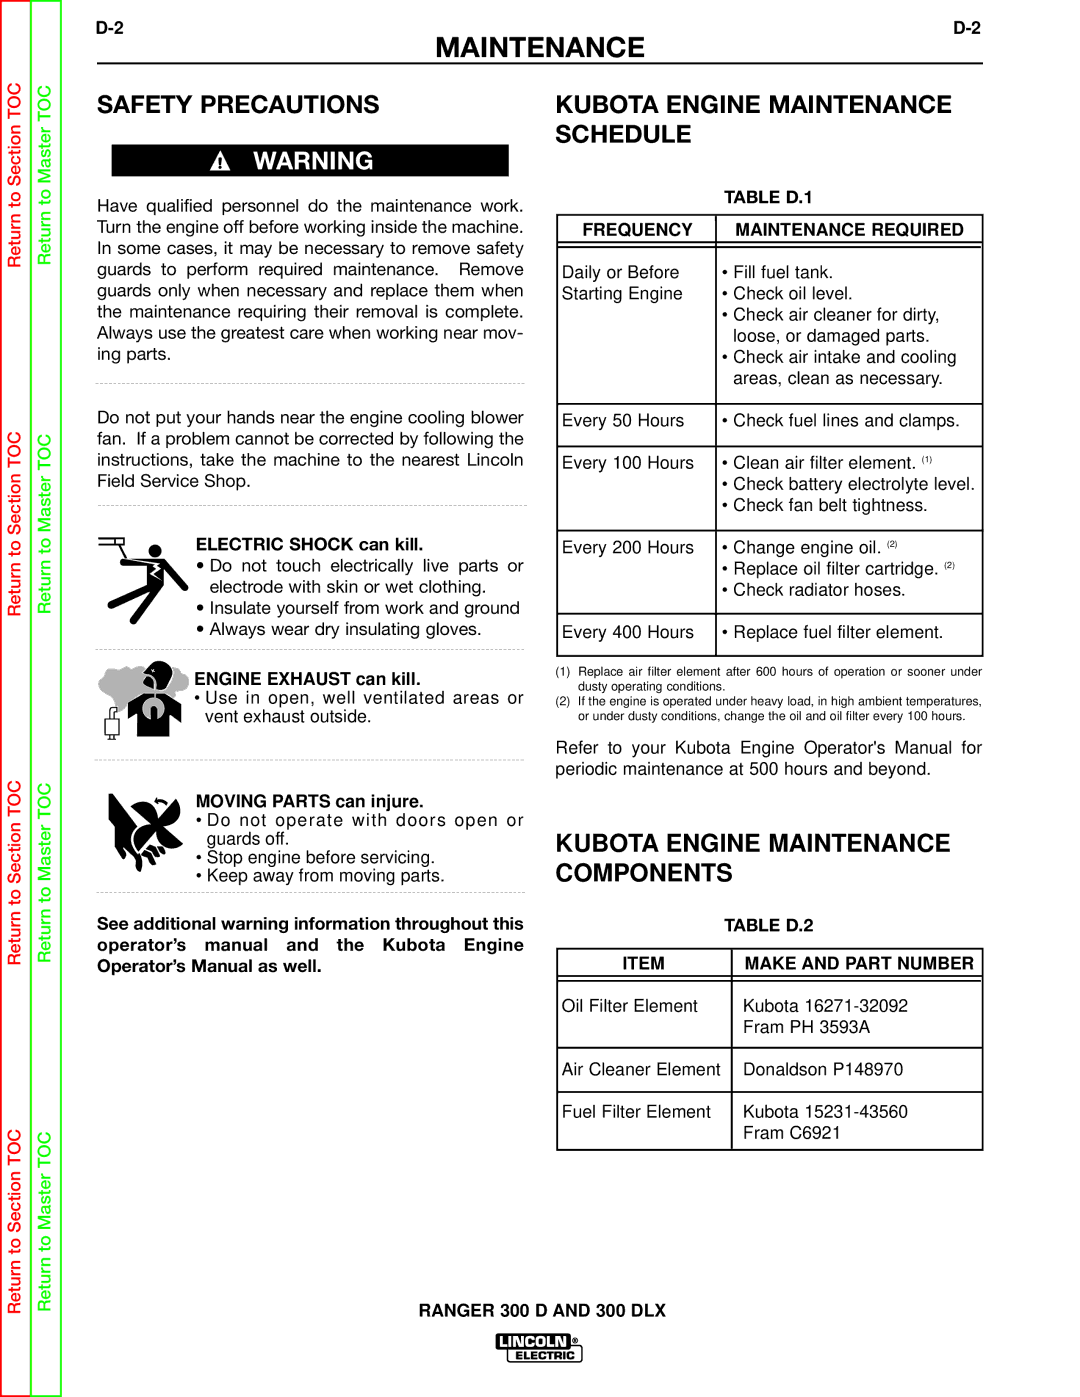 Lincoln Electric SVM148-B service manual Safety Precautions Kubota Engine Maintenance Schedule, Frequency 